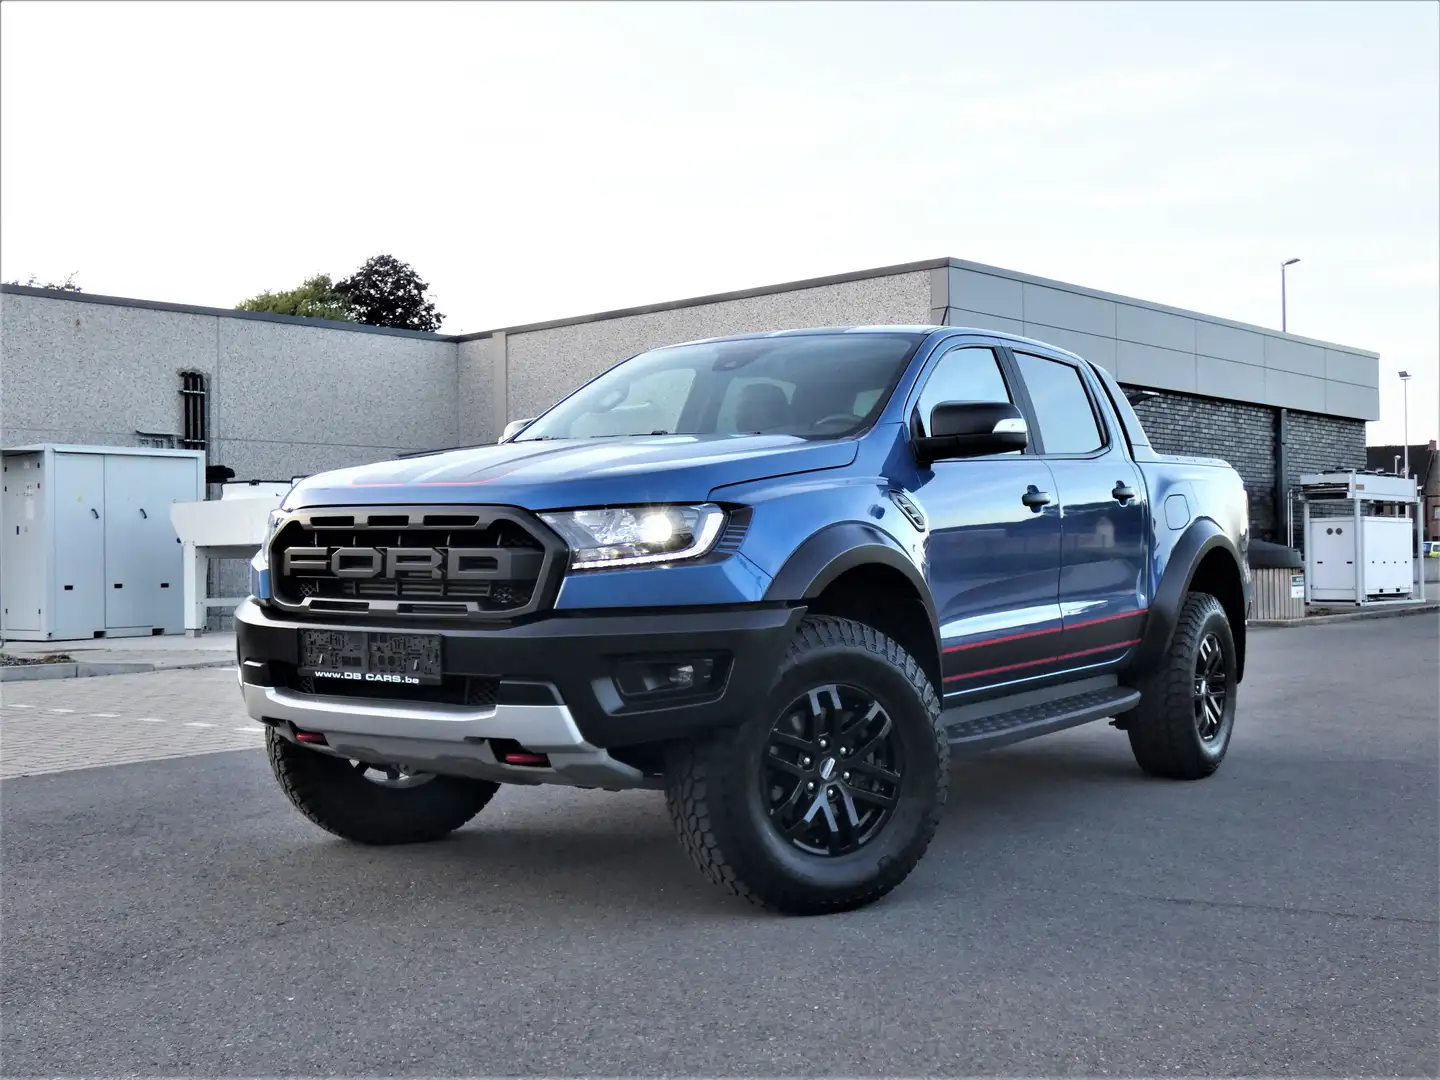 Ford Ranger Raptor 2.0 BiT Eco Specail edition Ford Performance Blue Blauw - 1